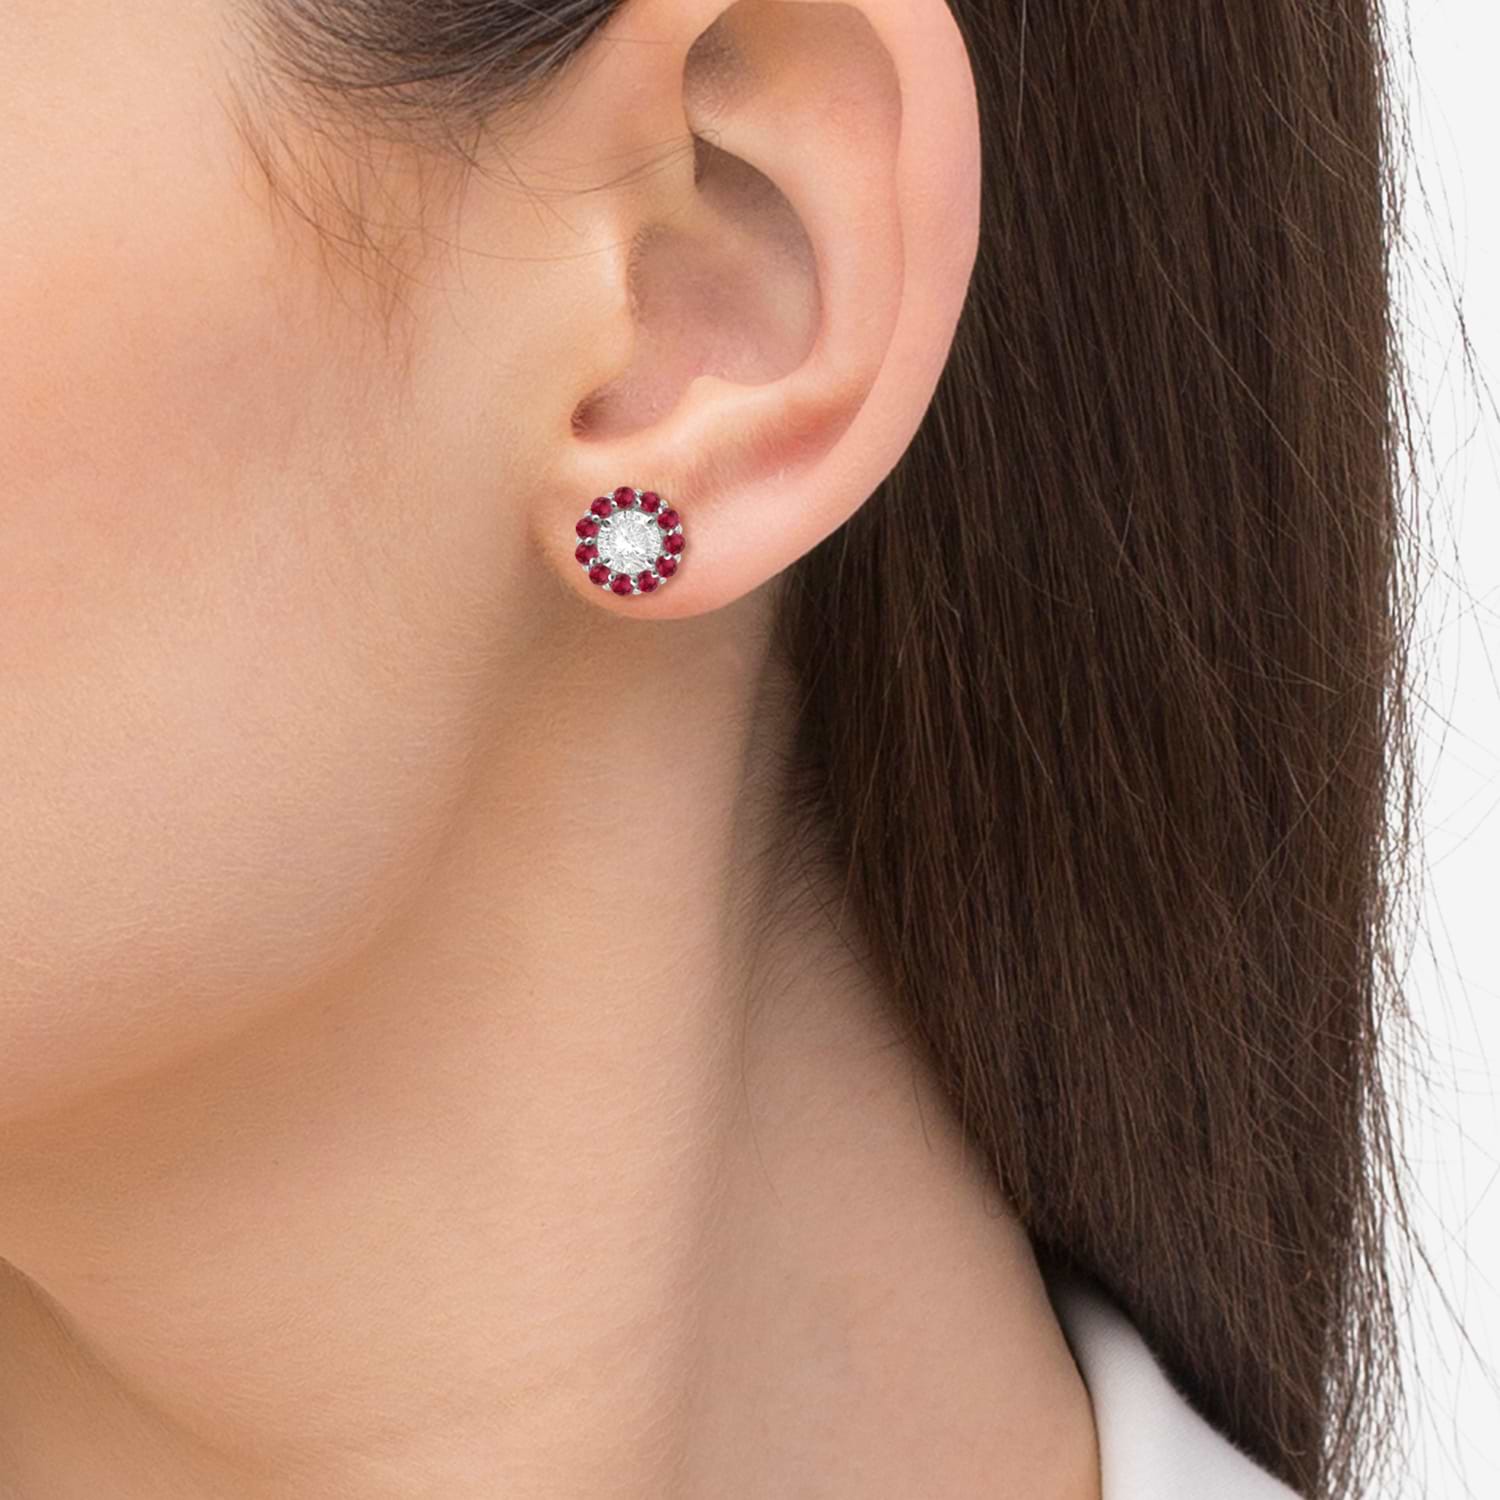 Round Ruby Earring Jackets for 5mm Studs 14K White Gold (1.08ct)